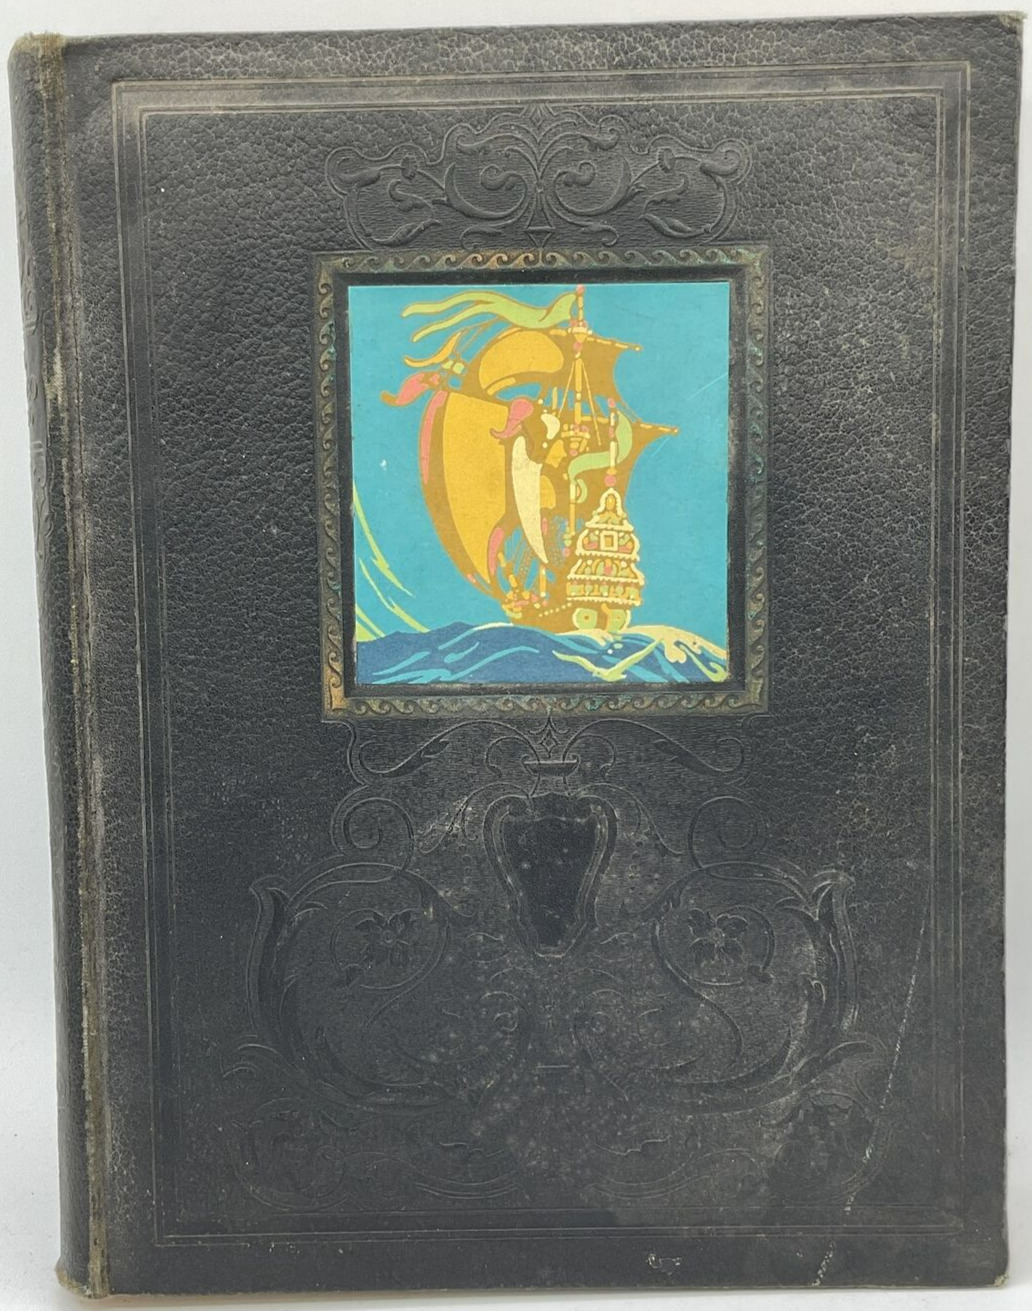 1926 University of Southern California Los Angeles El Rodeo Yearbook Annual